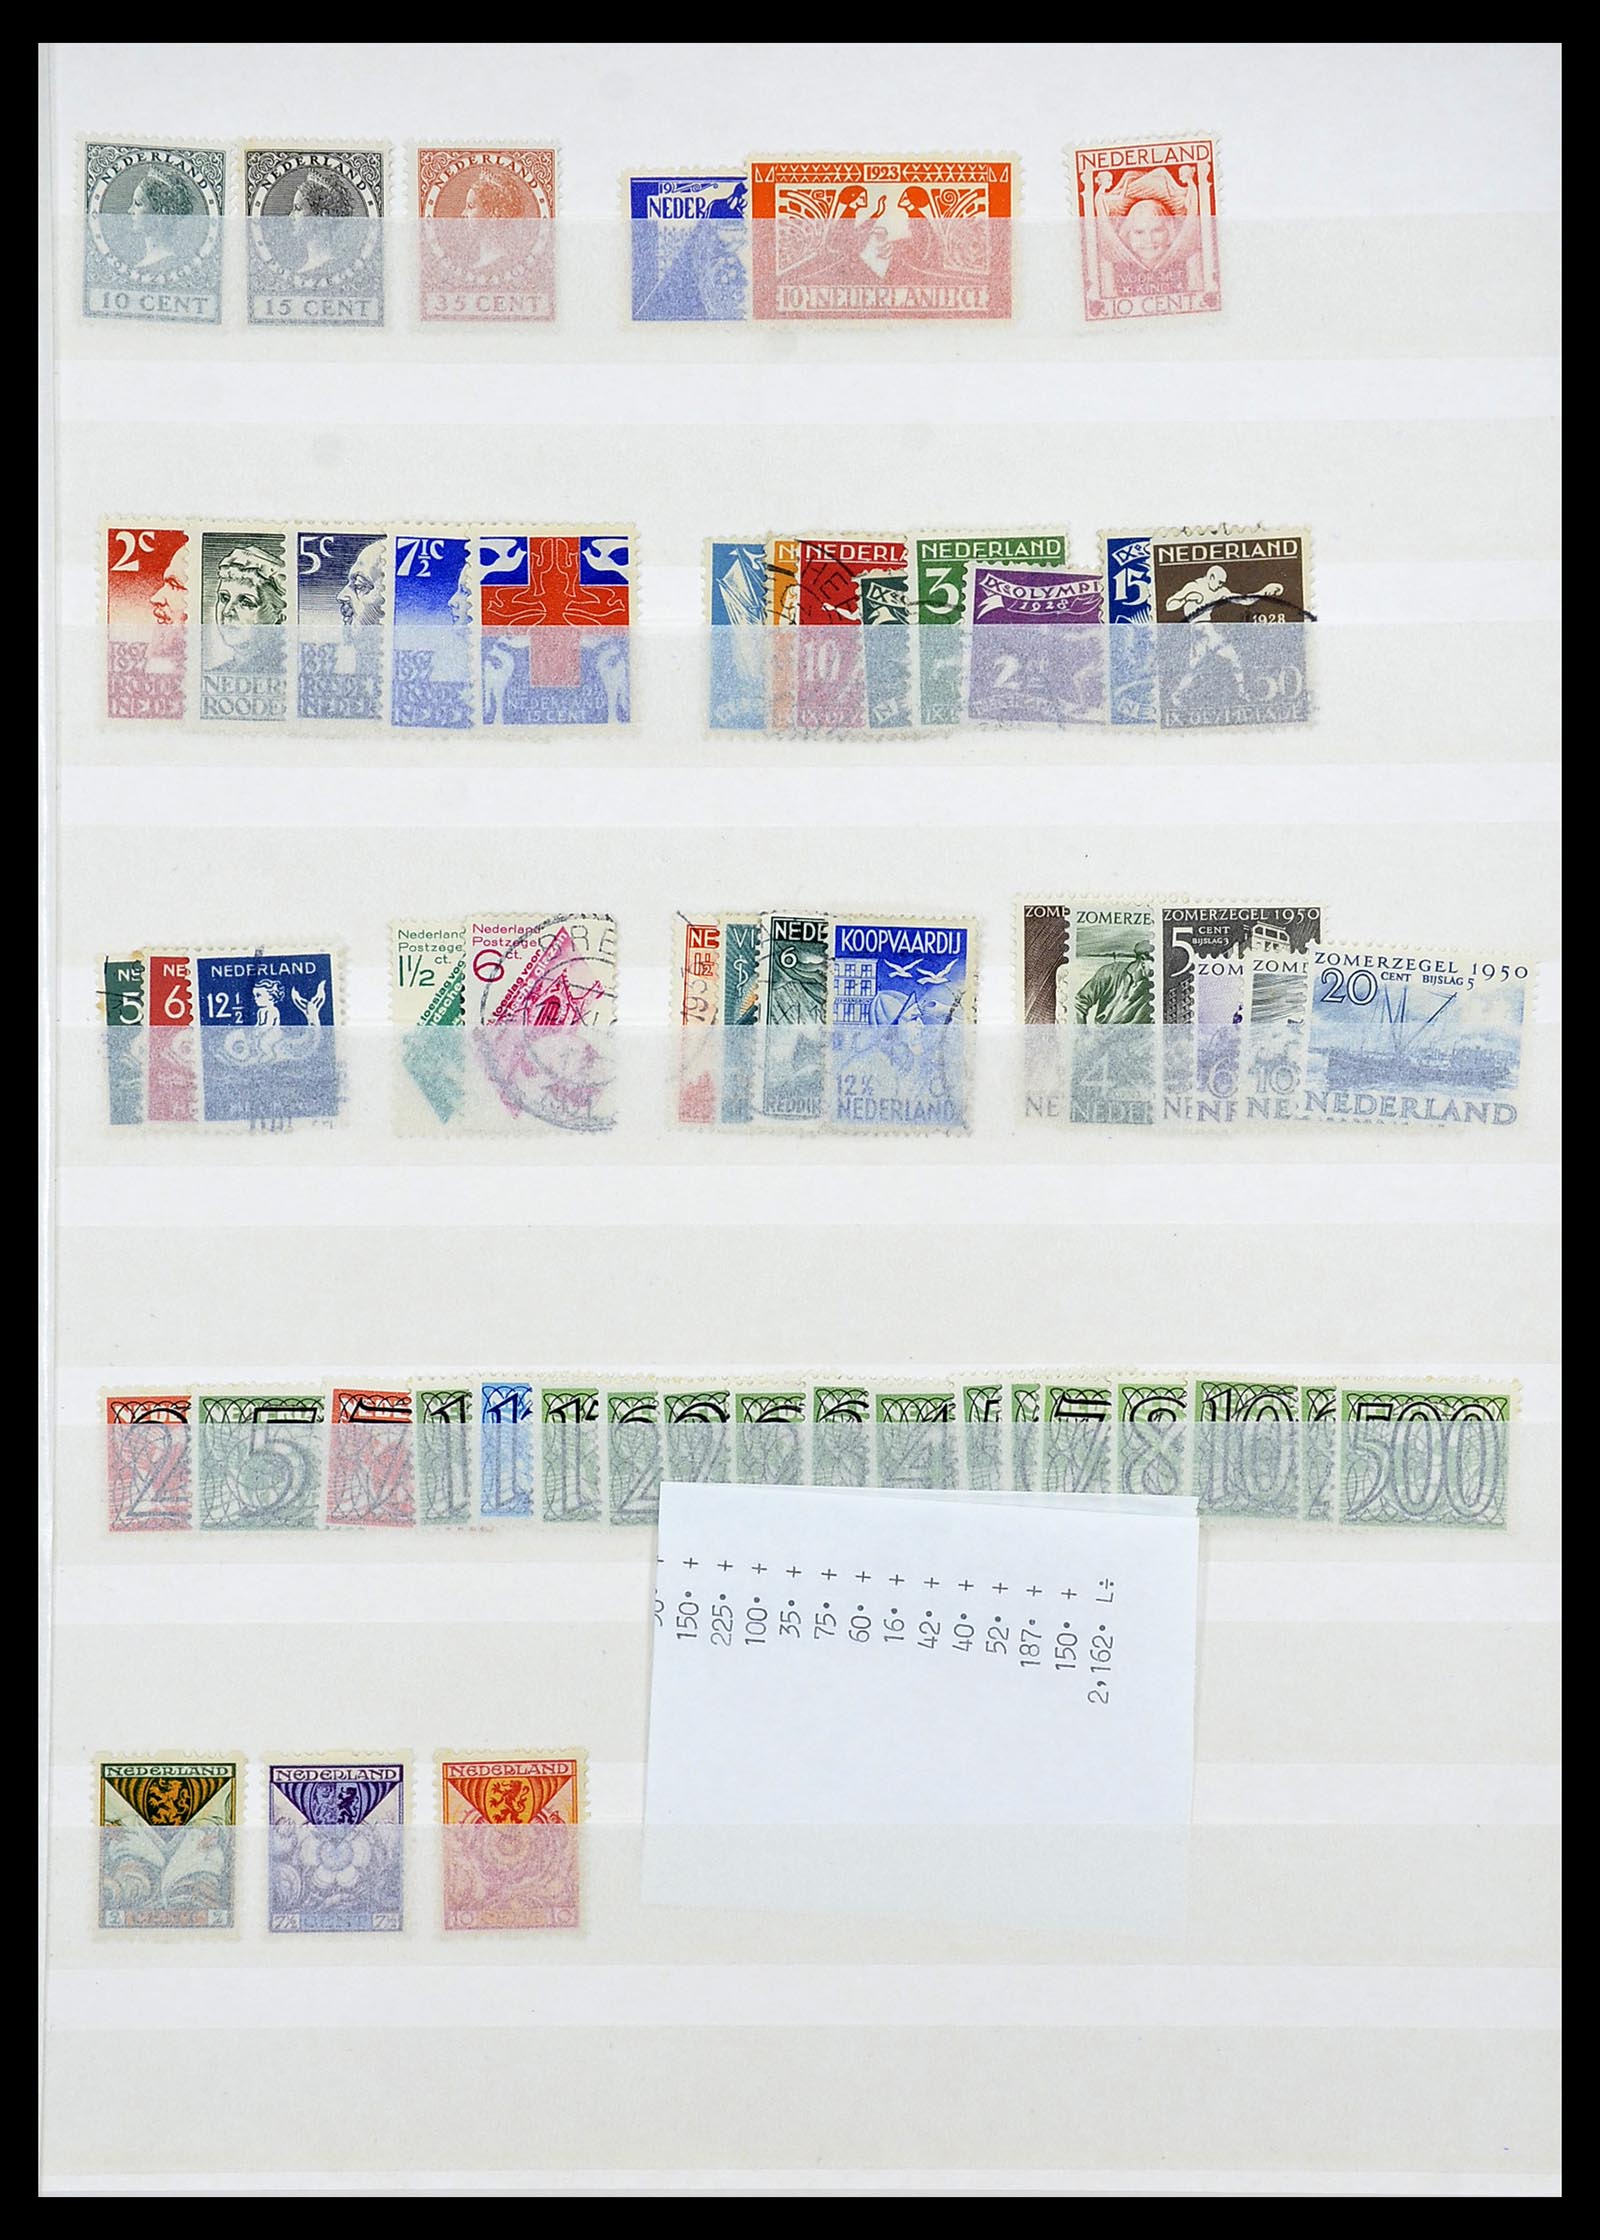 34263 019 - Stamp collection 34263 European countries key stamps 1840-1950.